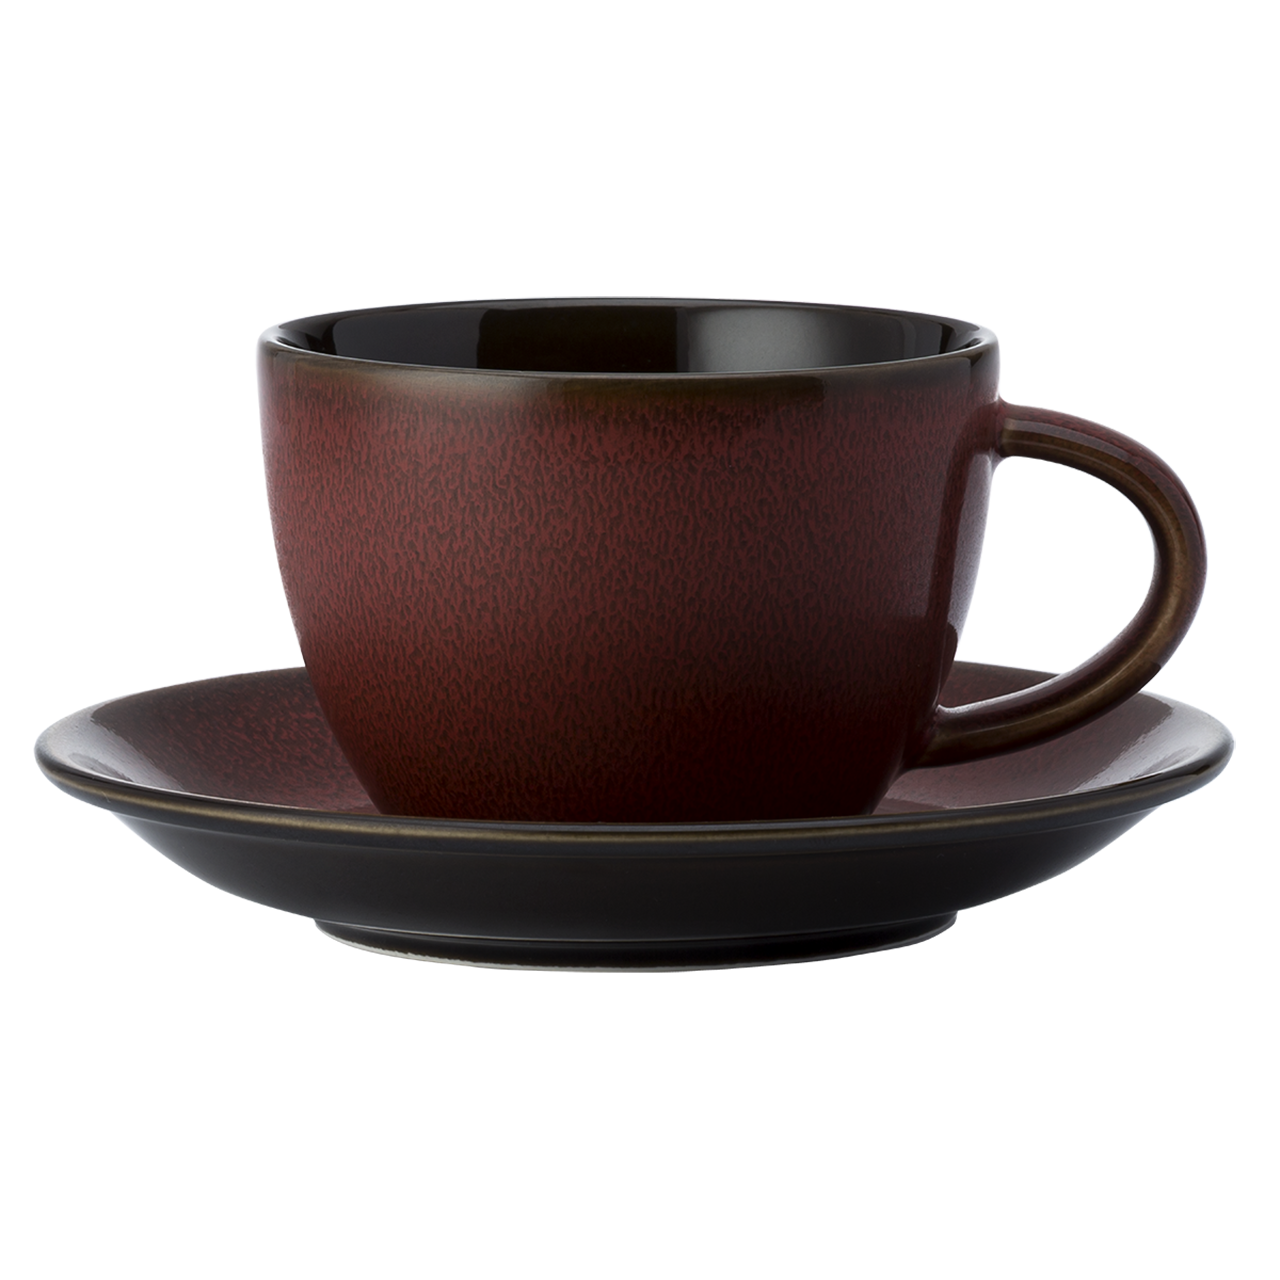 Rustic - Cup & Saucer